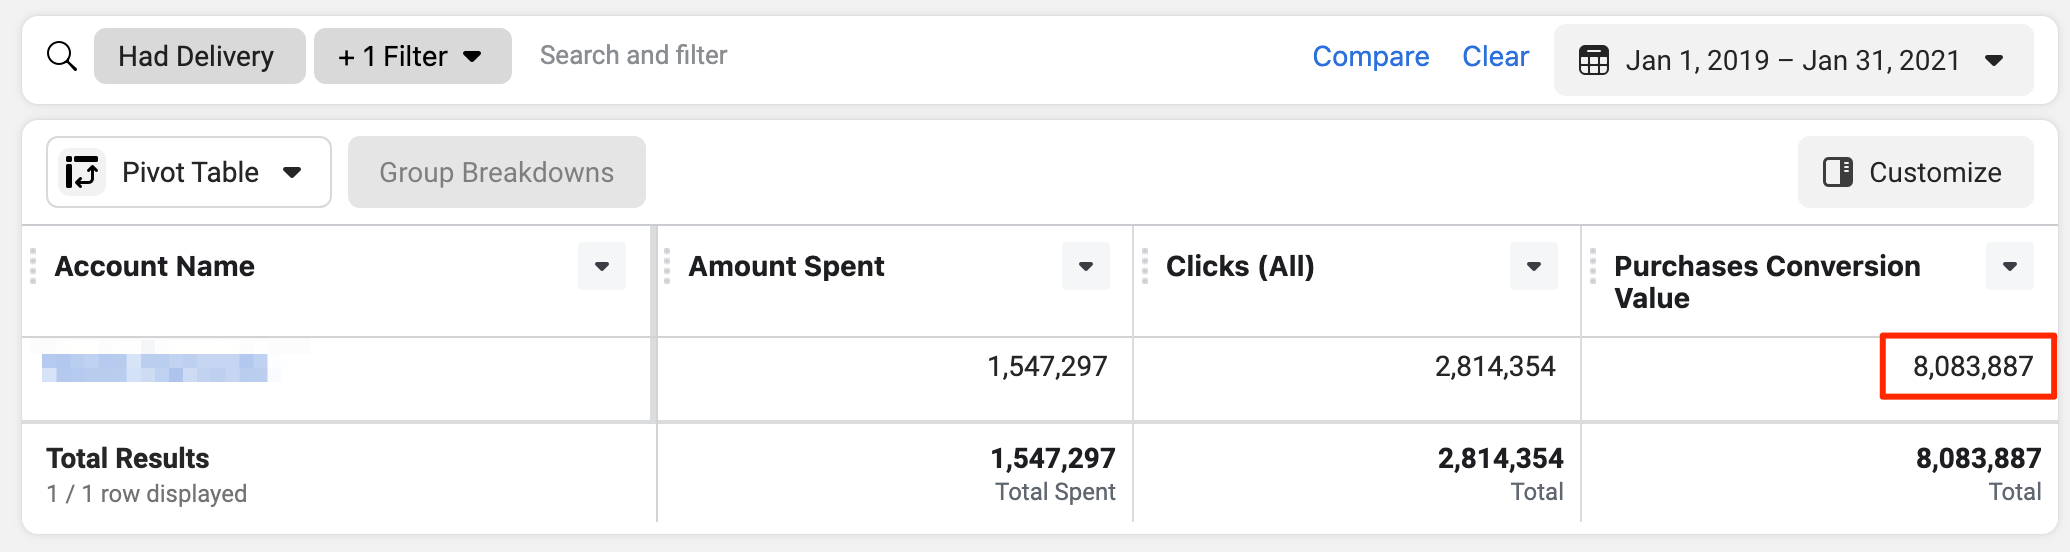 Facebook Ad Spending and Profit the Last 2 Years.